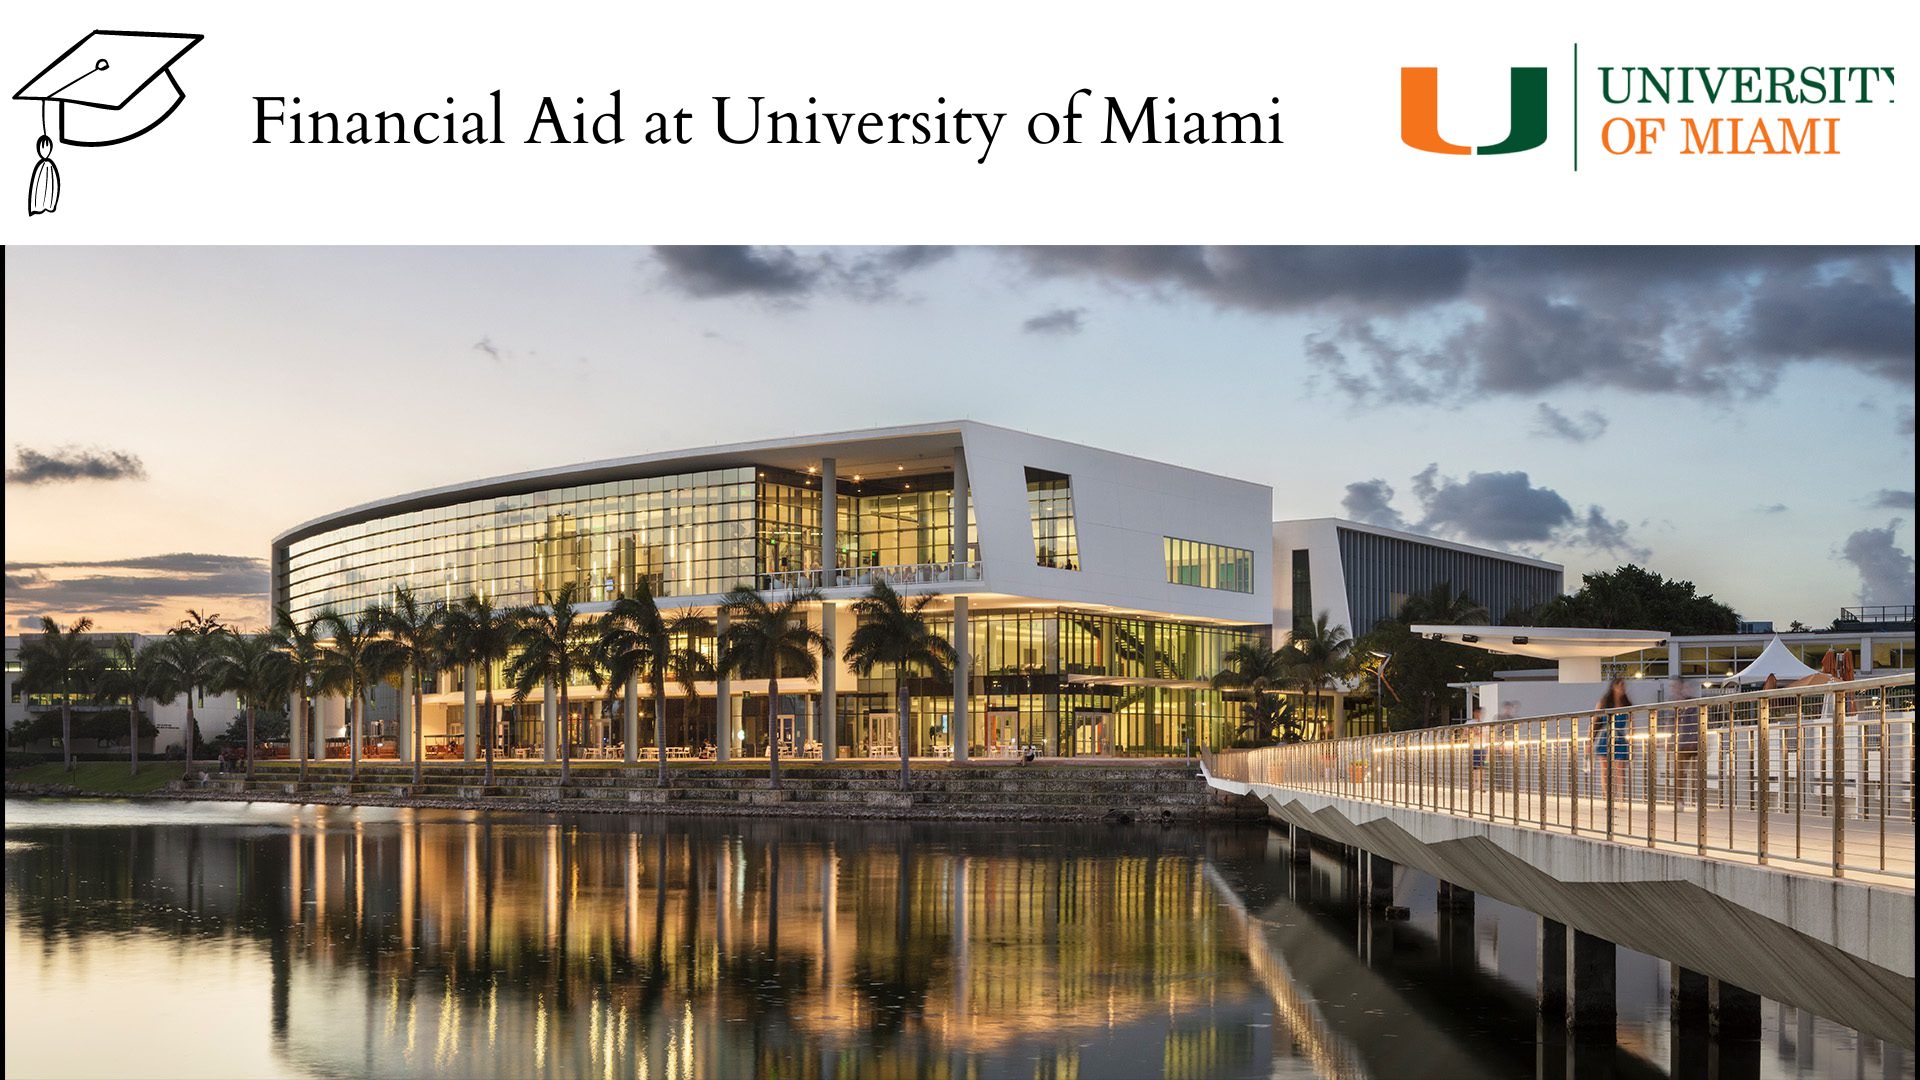 Meeting 100% of Need: Financial Aid at University of Miami